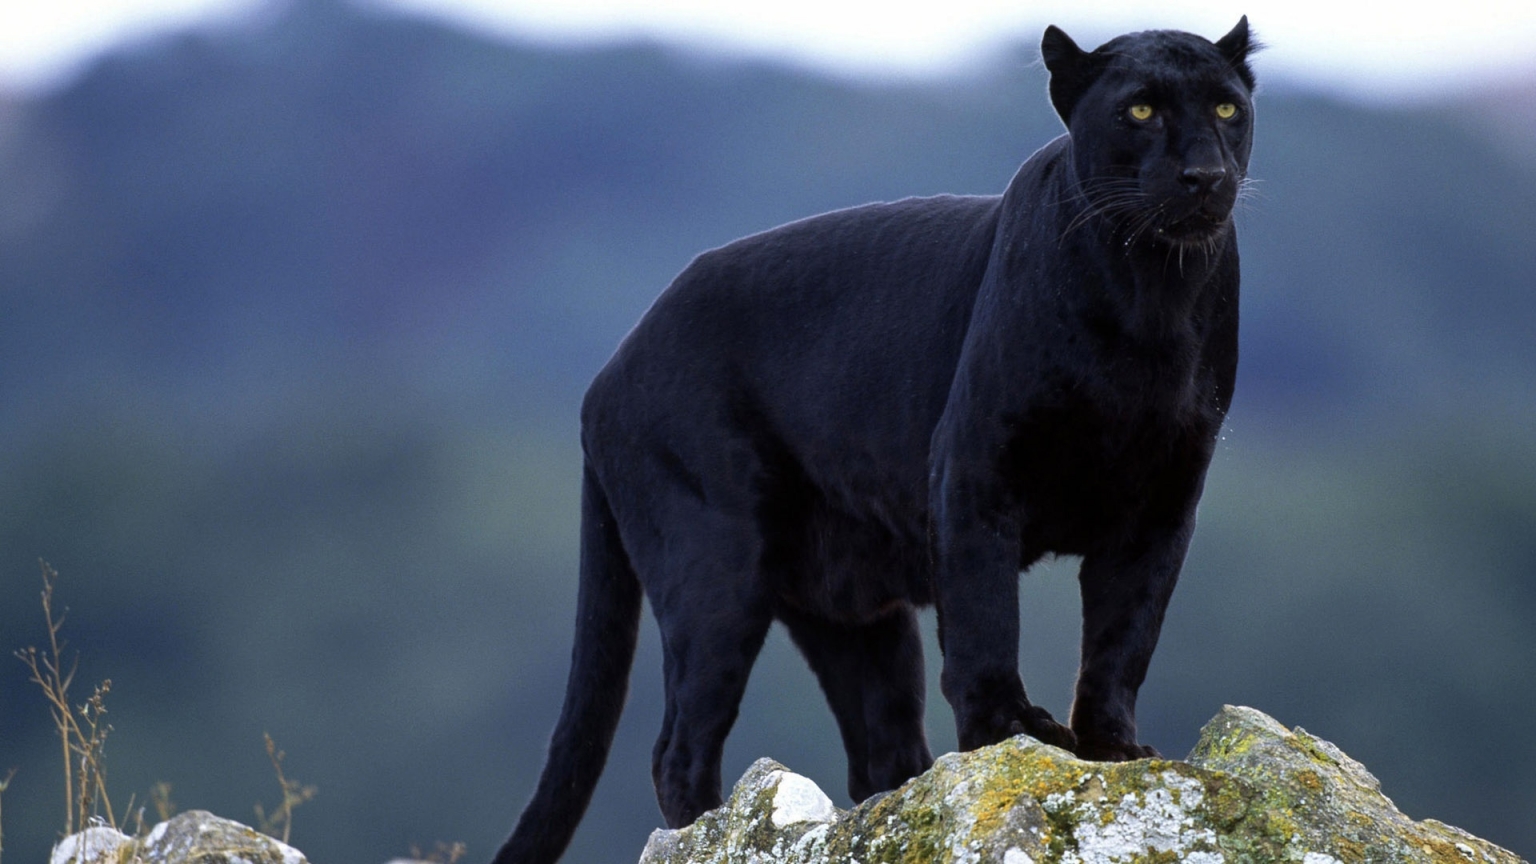 Superb Panther for 1536 x 864 HDTV resolution